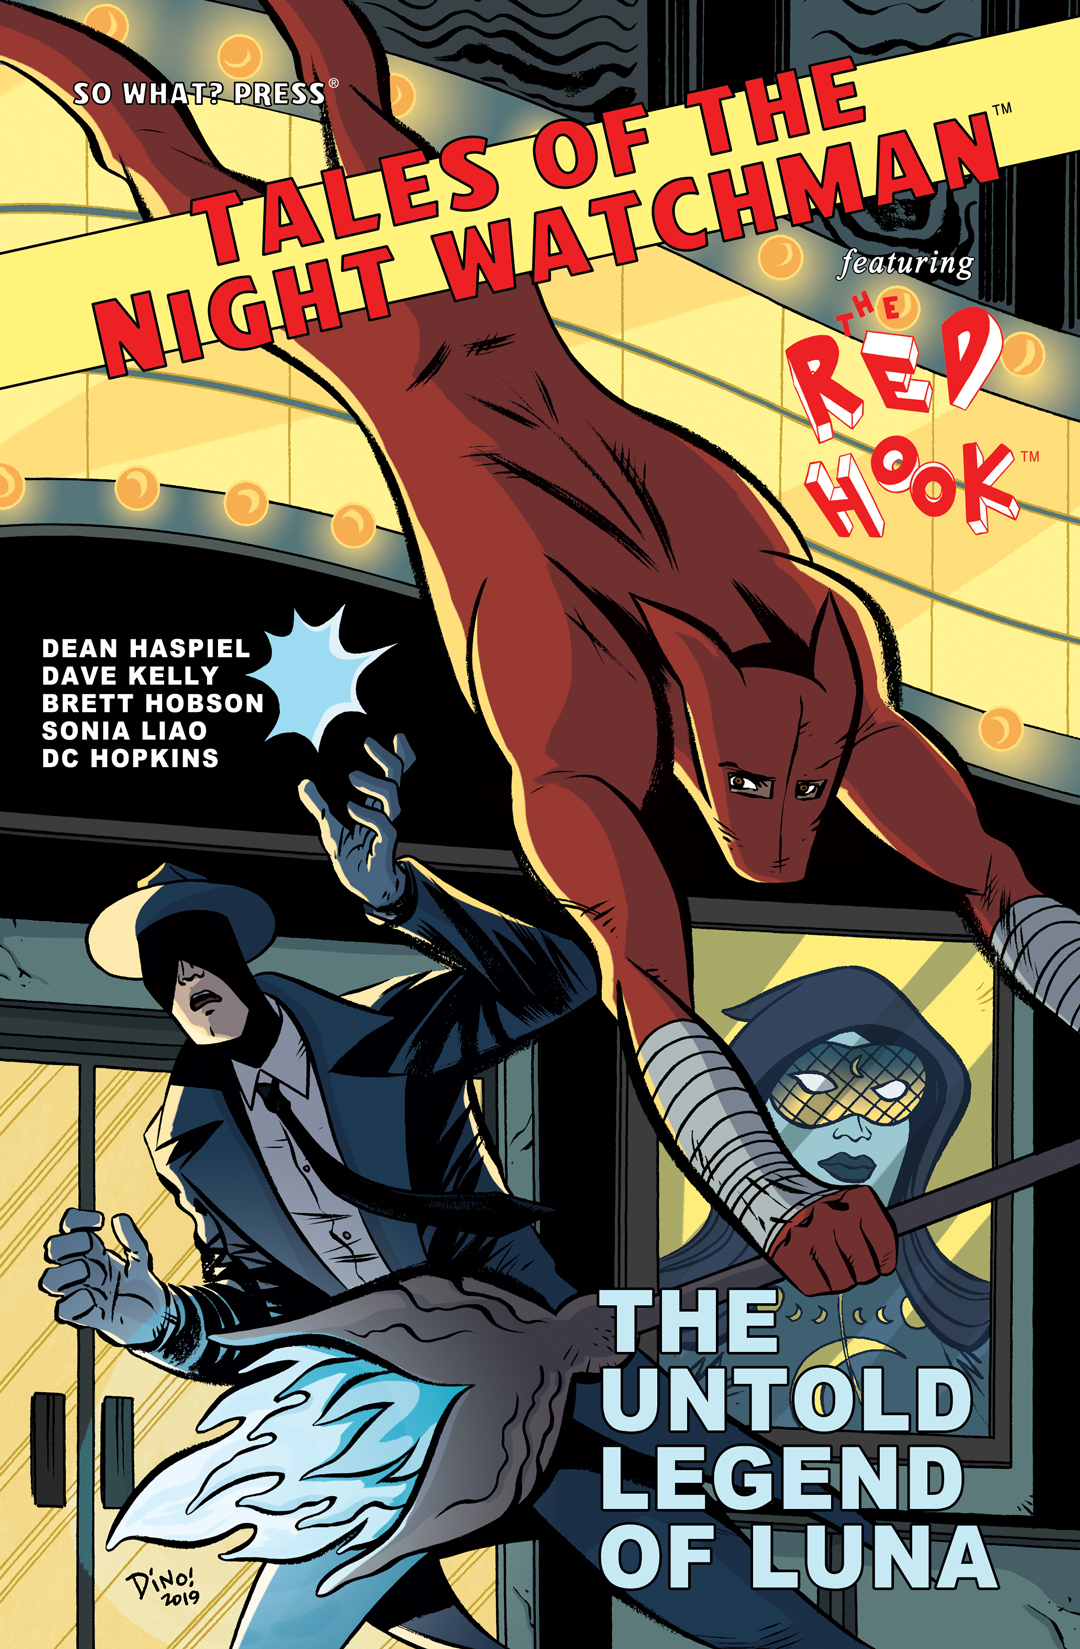 Tales of the Night Watchman / The Red Hook: The Untold Legend of Luna #1